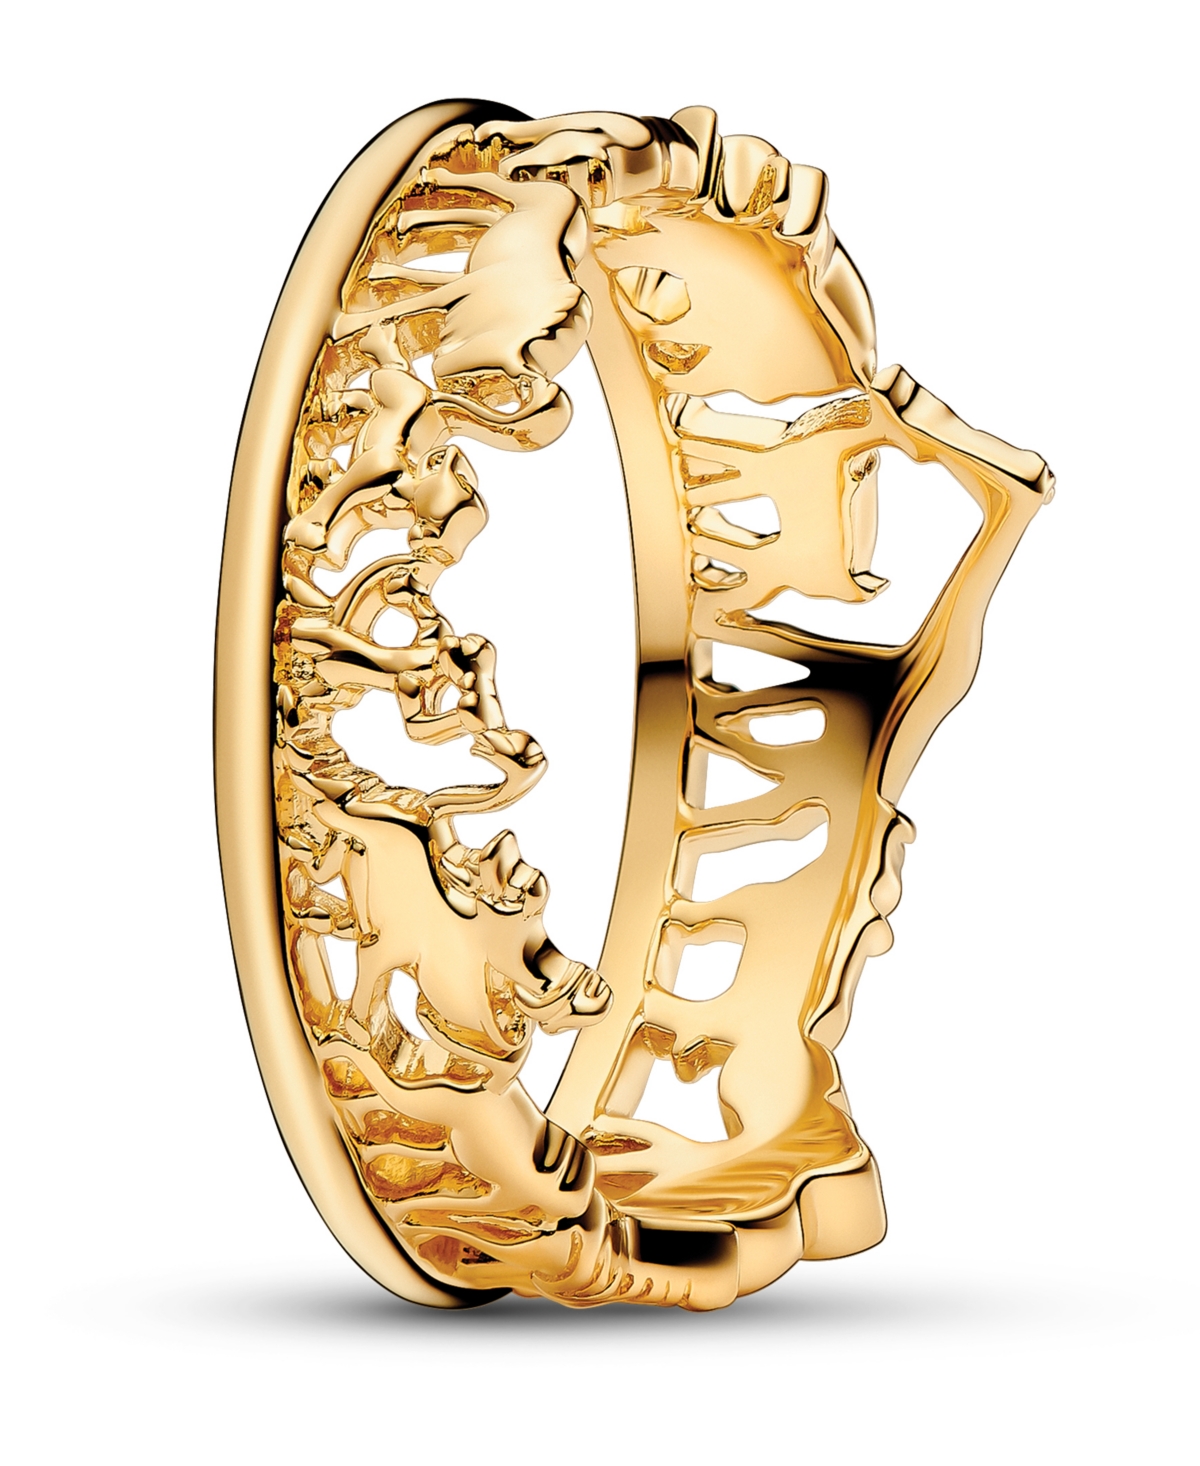 The Lion King Ring in 14k Gold-plated - Gold